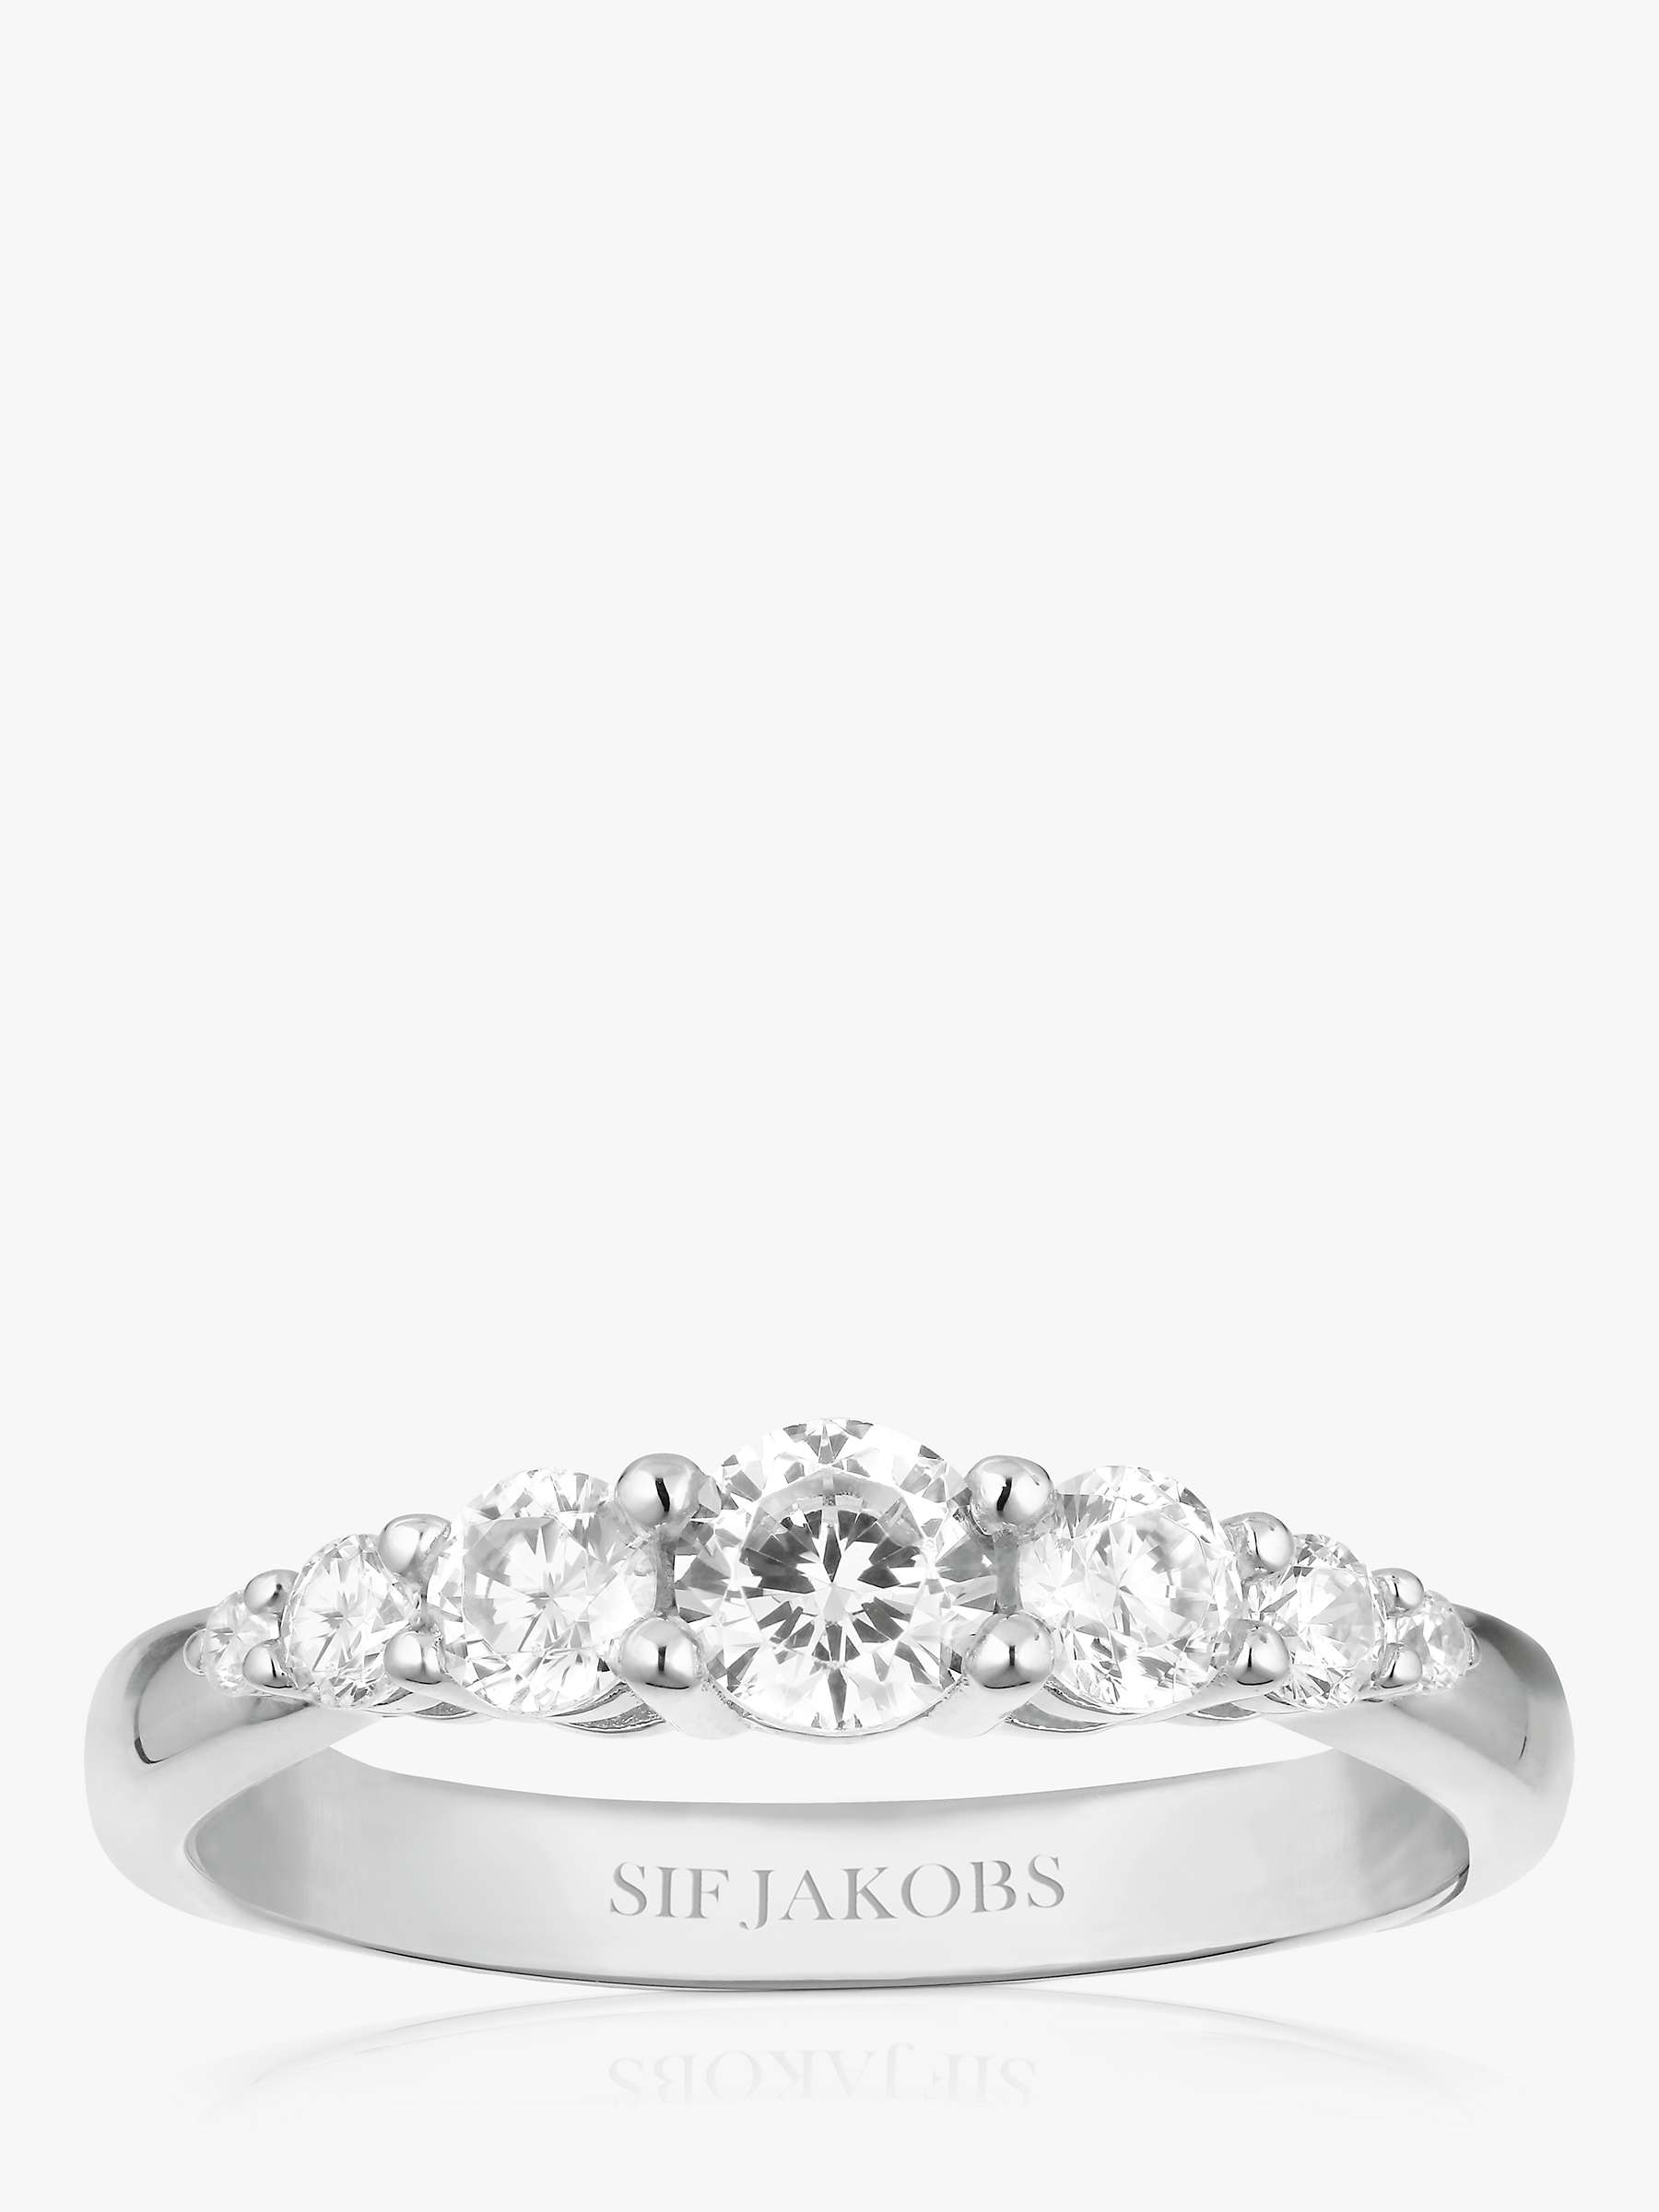 Buy Sif Jakobs Jewellery Graduating Cubic Zirconia Ring, Silver/Clear Online at johnlewis.com